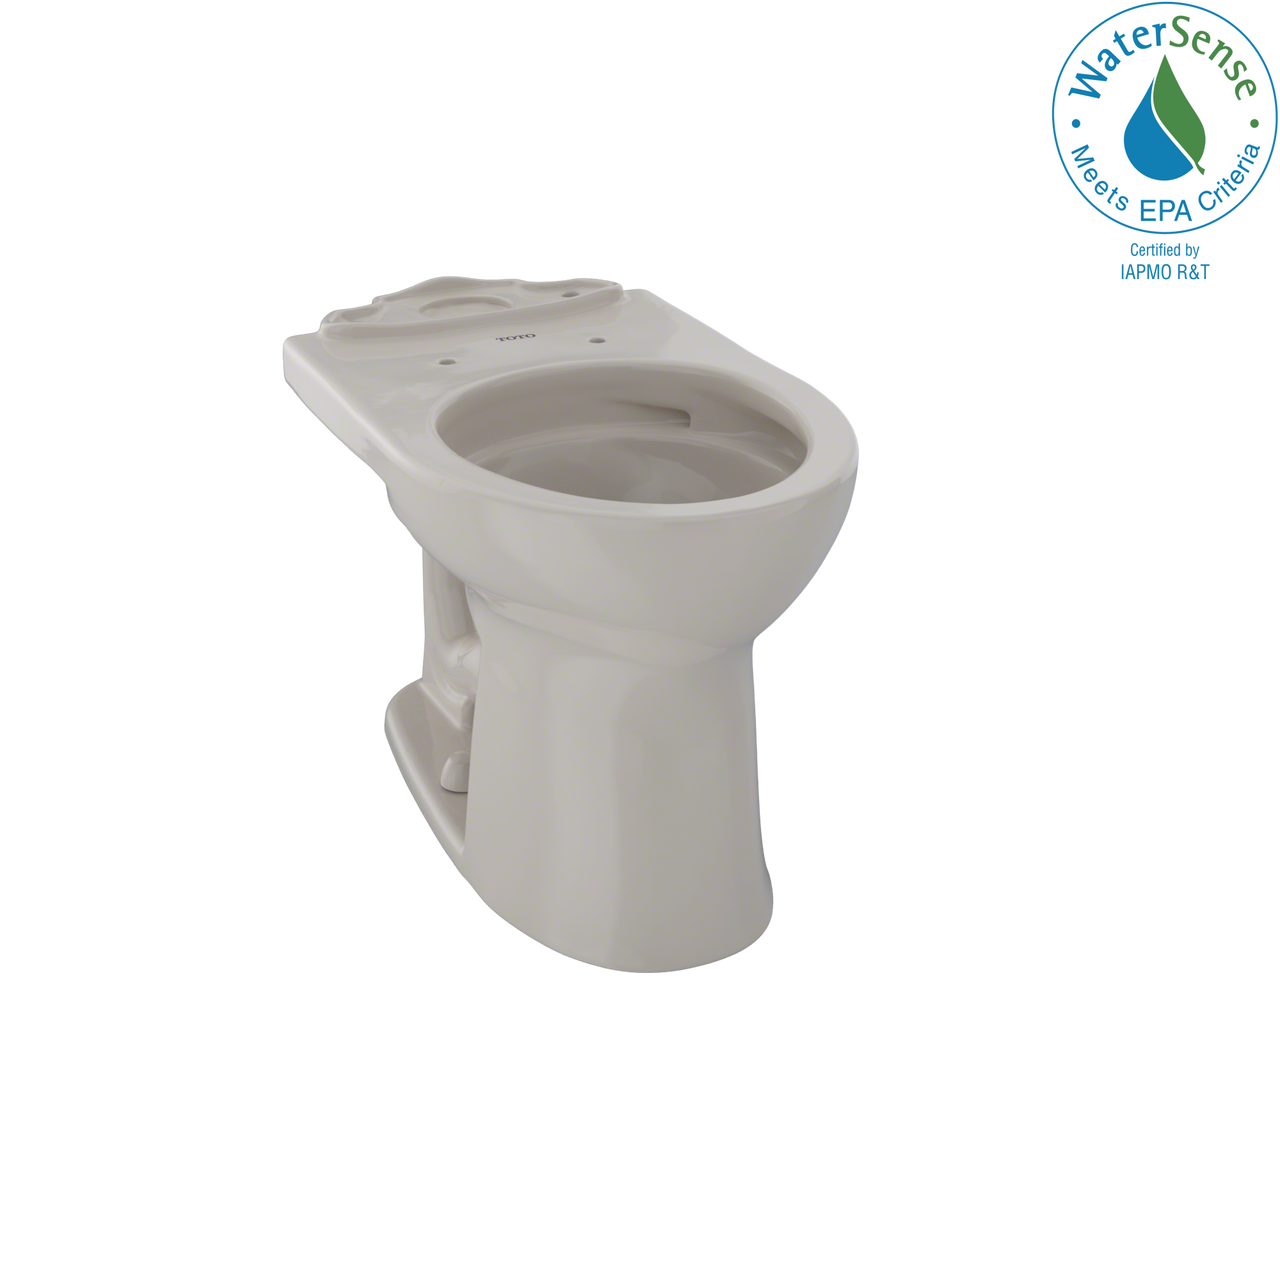 TOTO Drake II Universal Height Round Toilet Bowl with CeFiONtect,  - CST453CEFG#03 - BNGBath